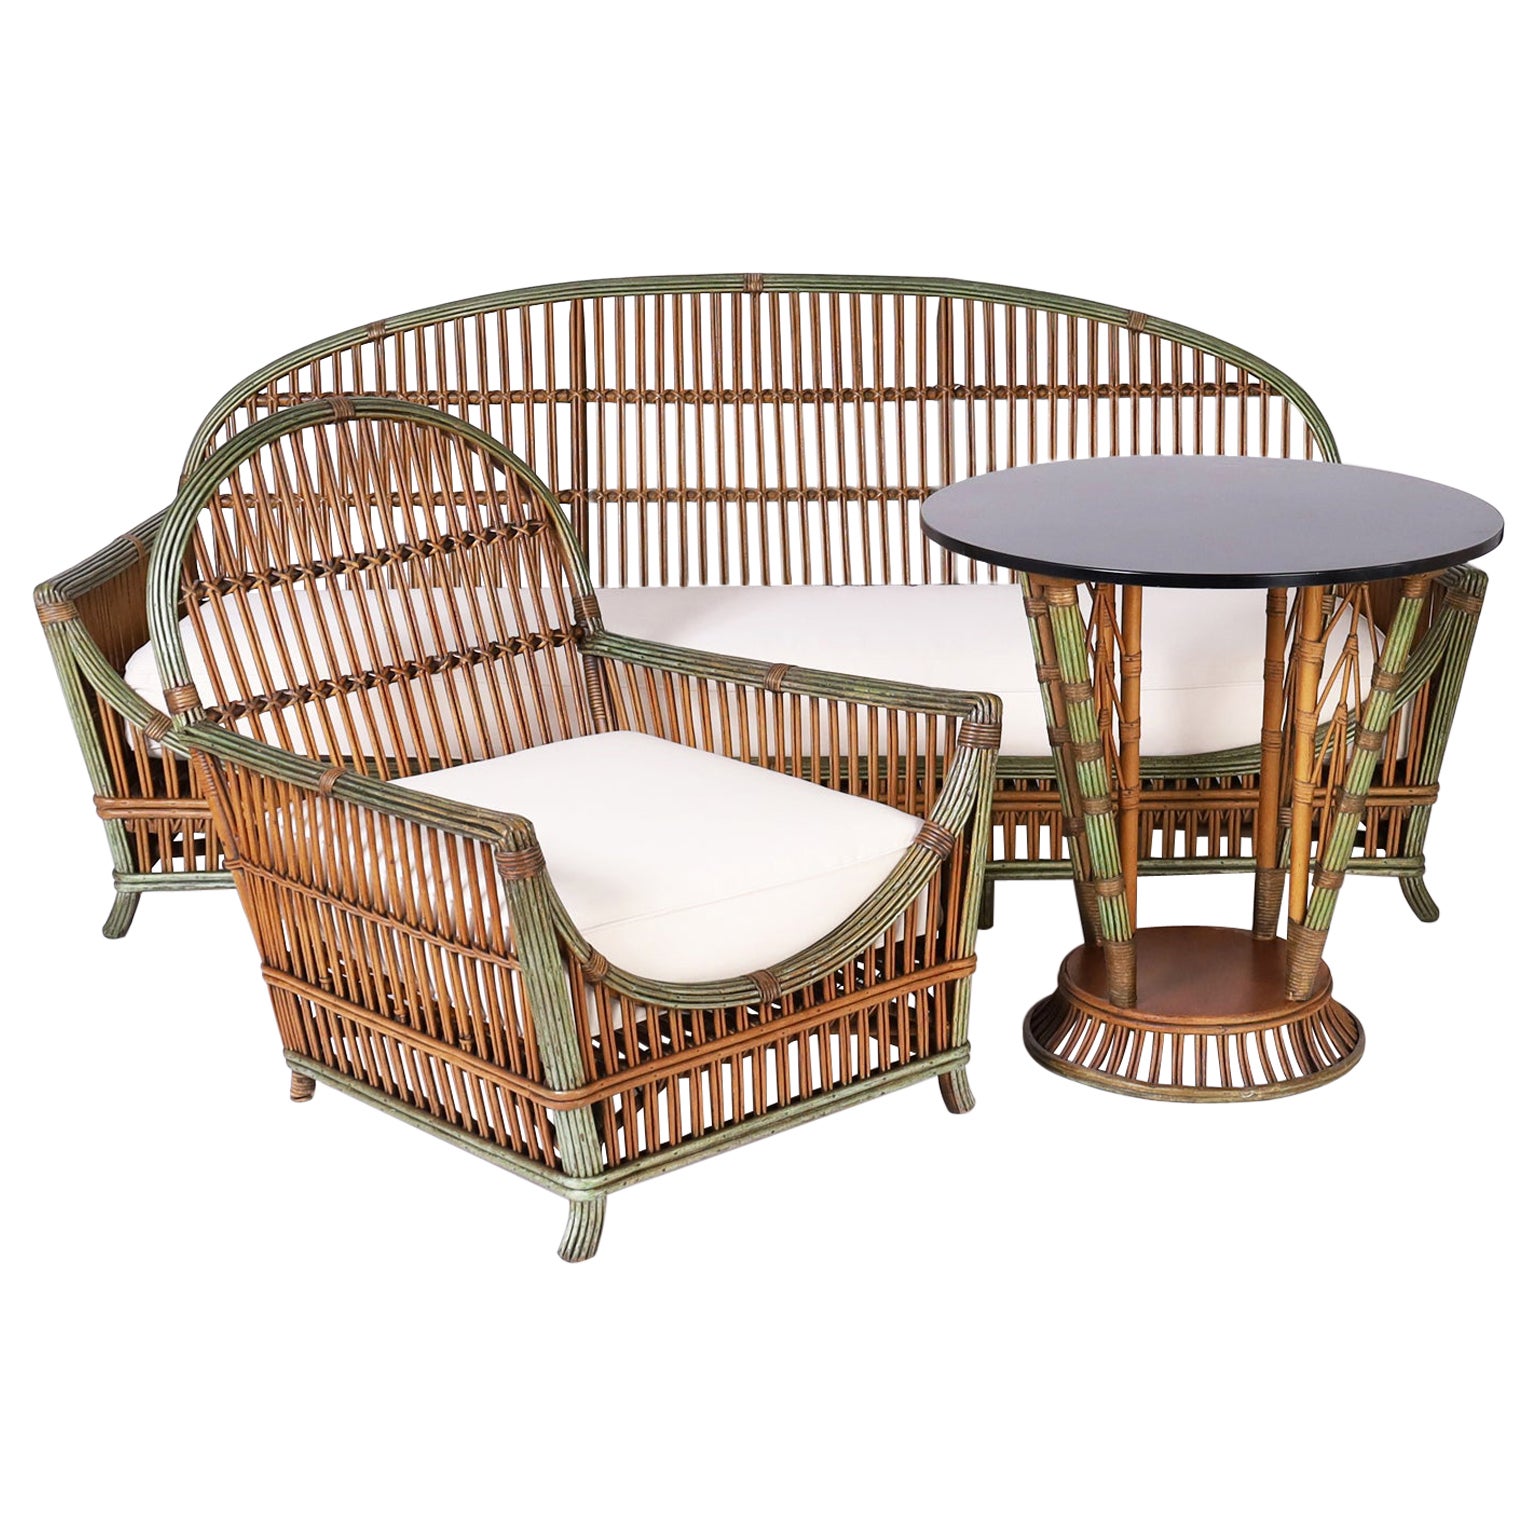 Three Piece Art Deco Rattan Sofa, Chair, and Table. Priced for All, or Each. 